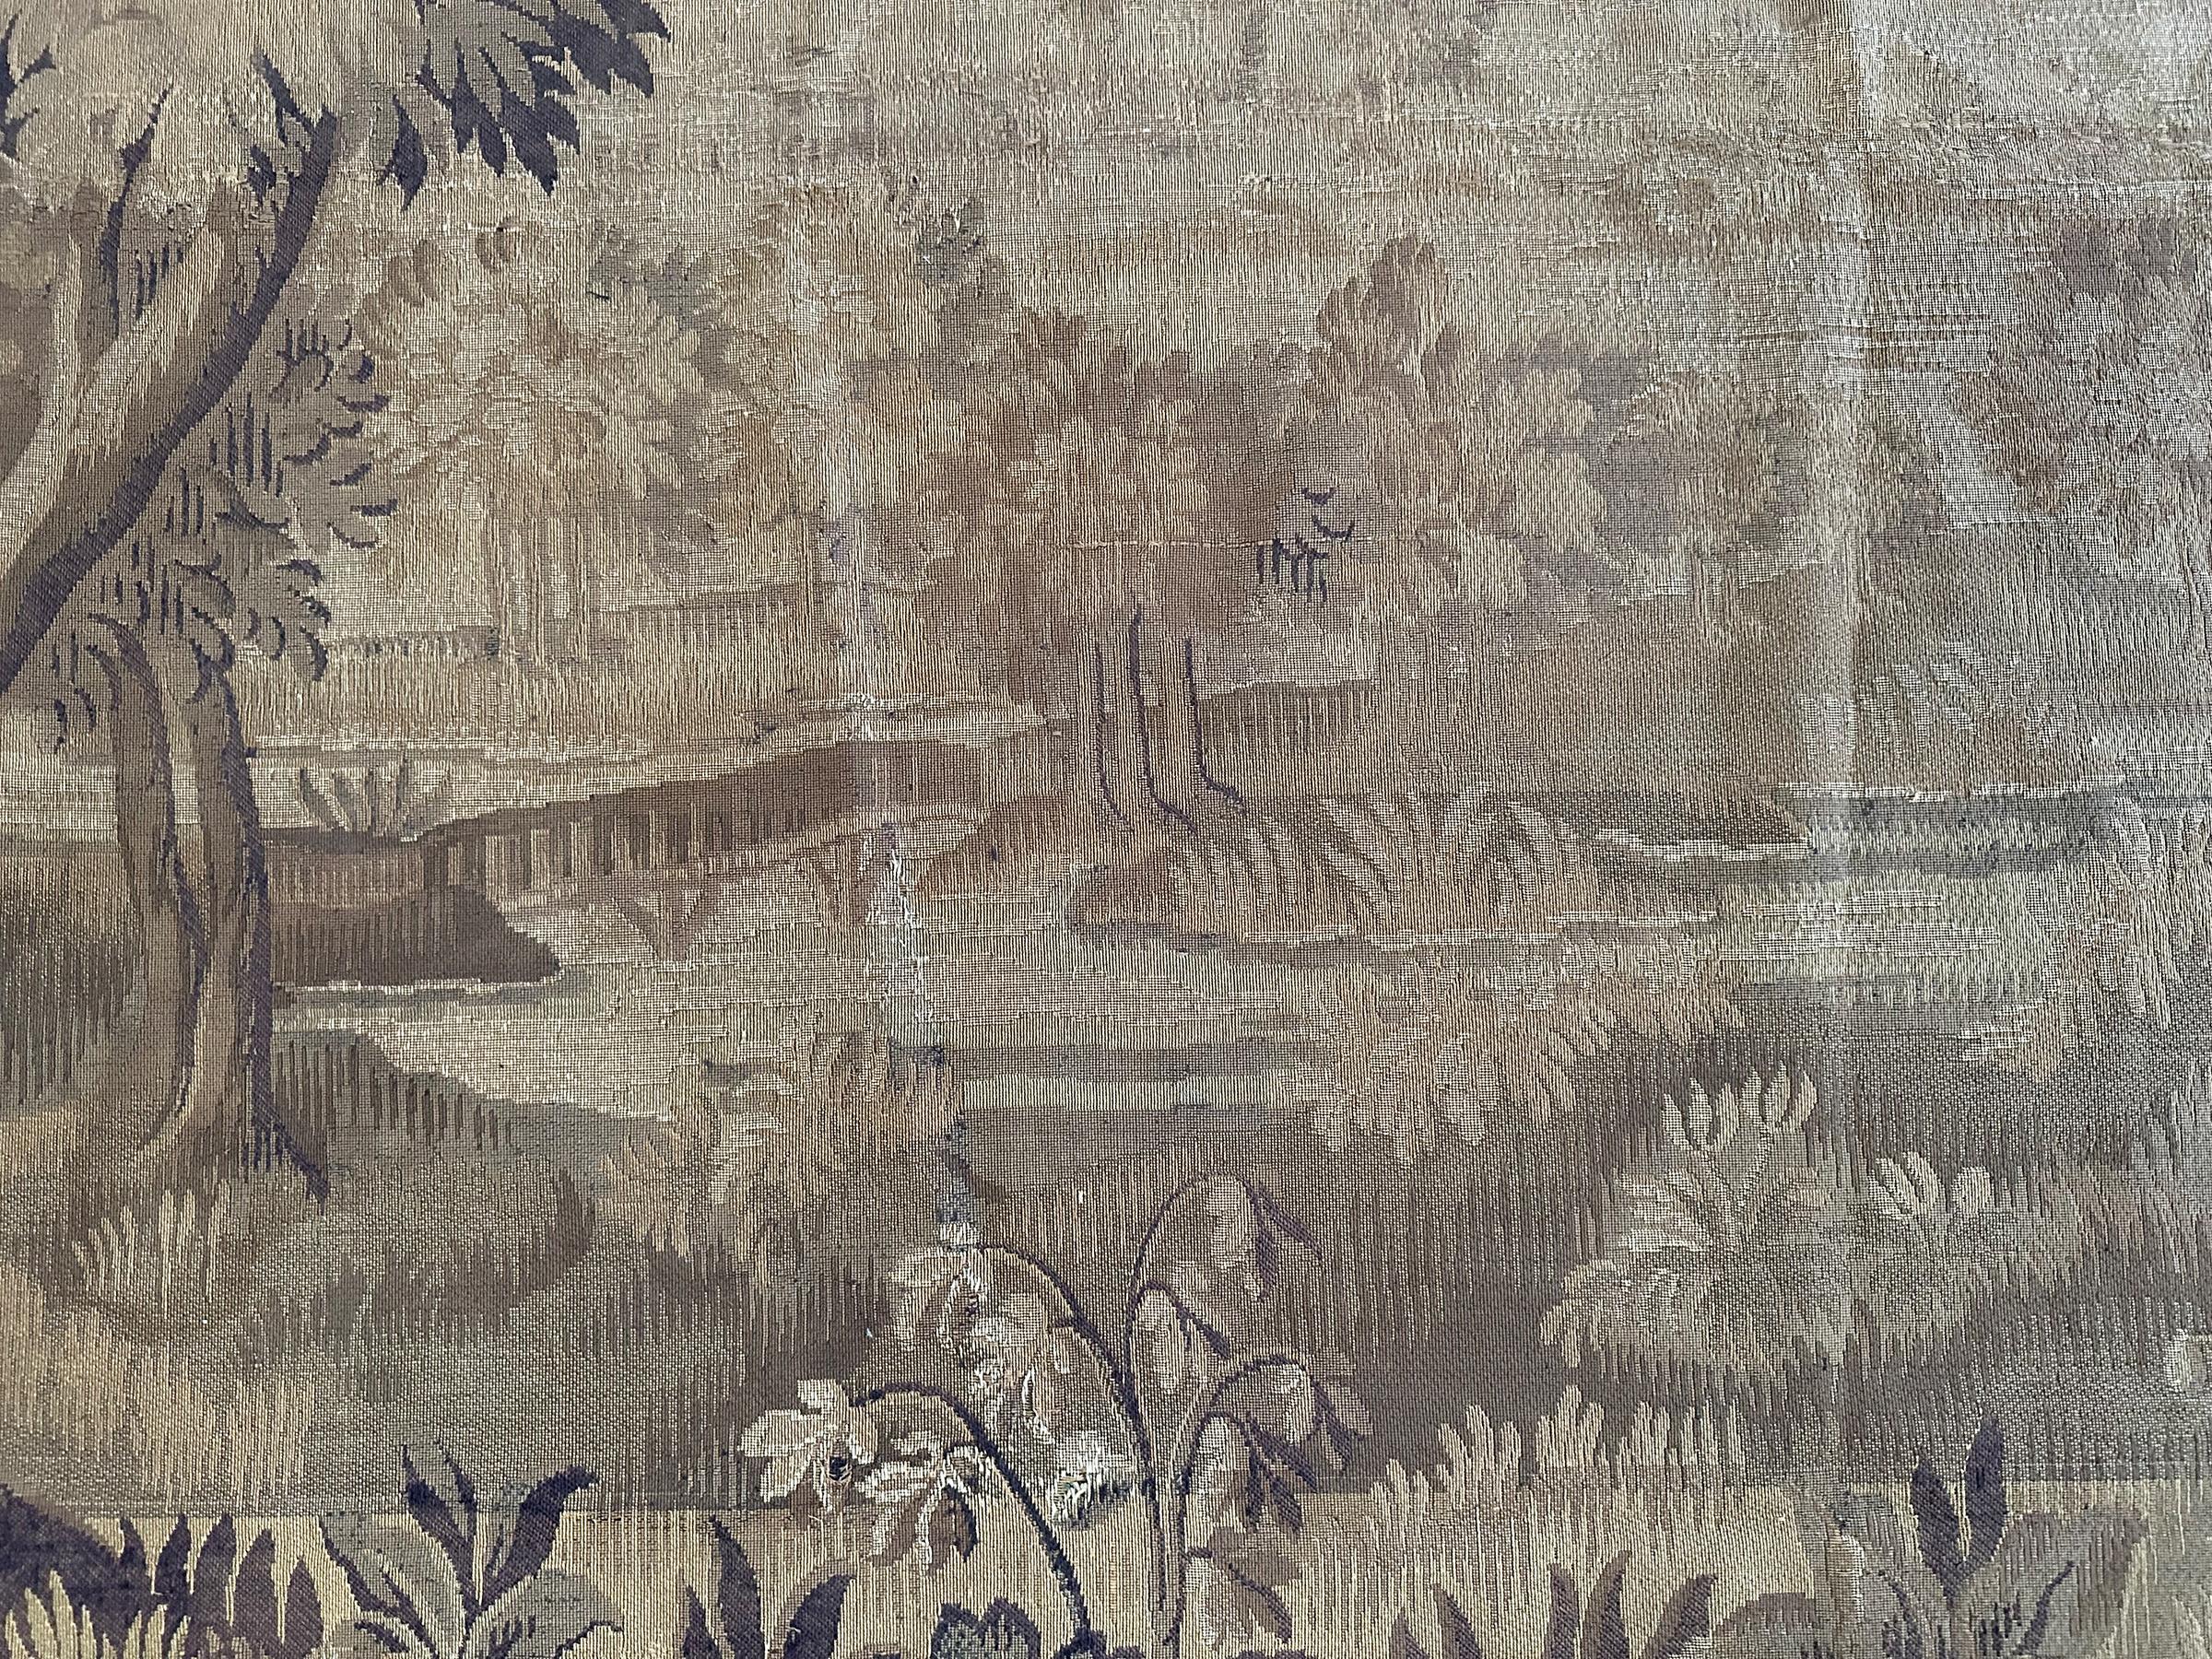 Early 20th Century 1900 Antique French Tapestry Wool Silk Large Oversize Tapestry 7x10 224x295cm